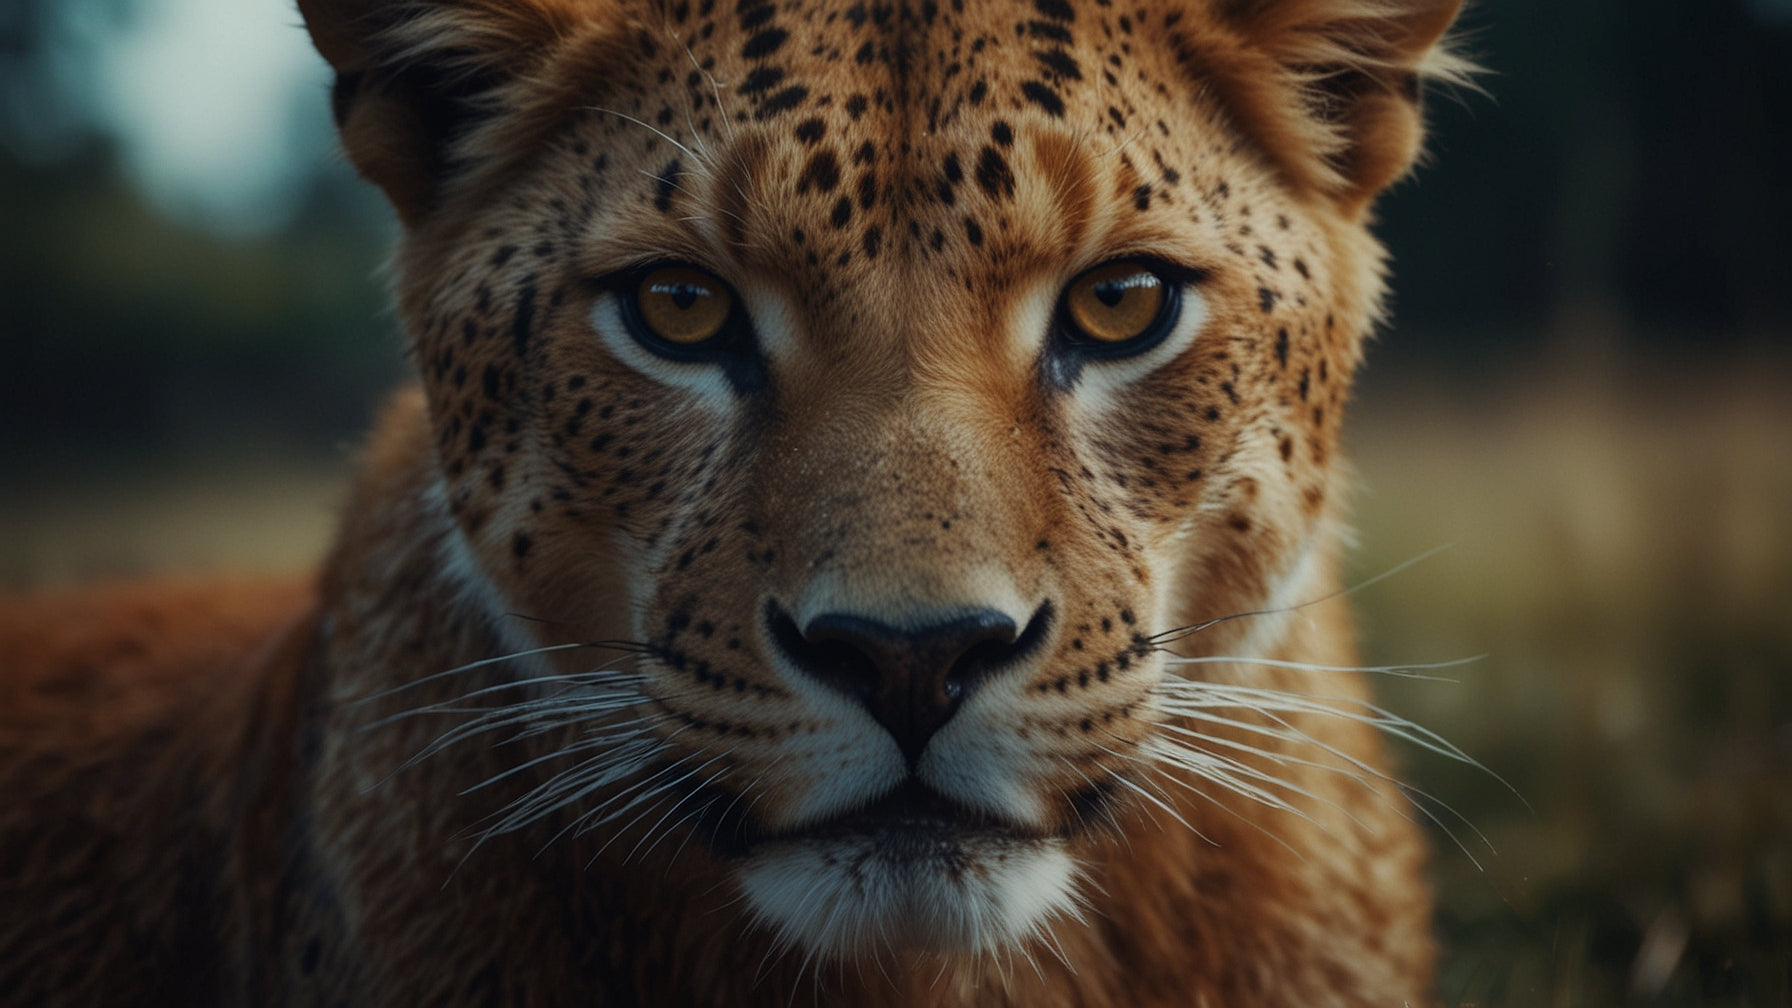 An intense gaze captured as a leopard looks directly into the camera, showcasing its wild beauty.